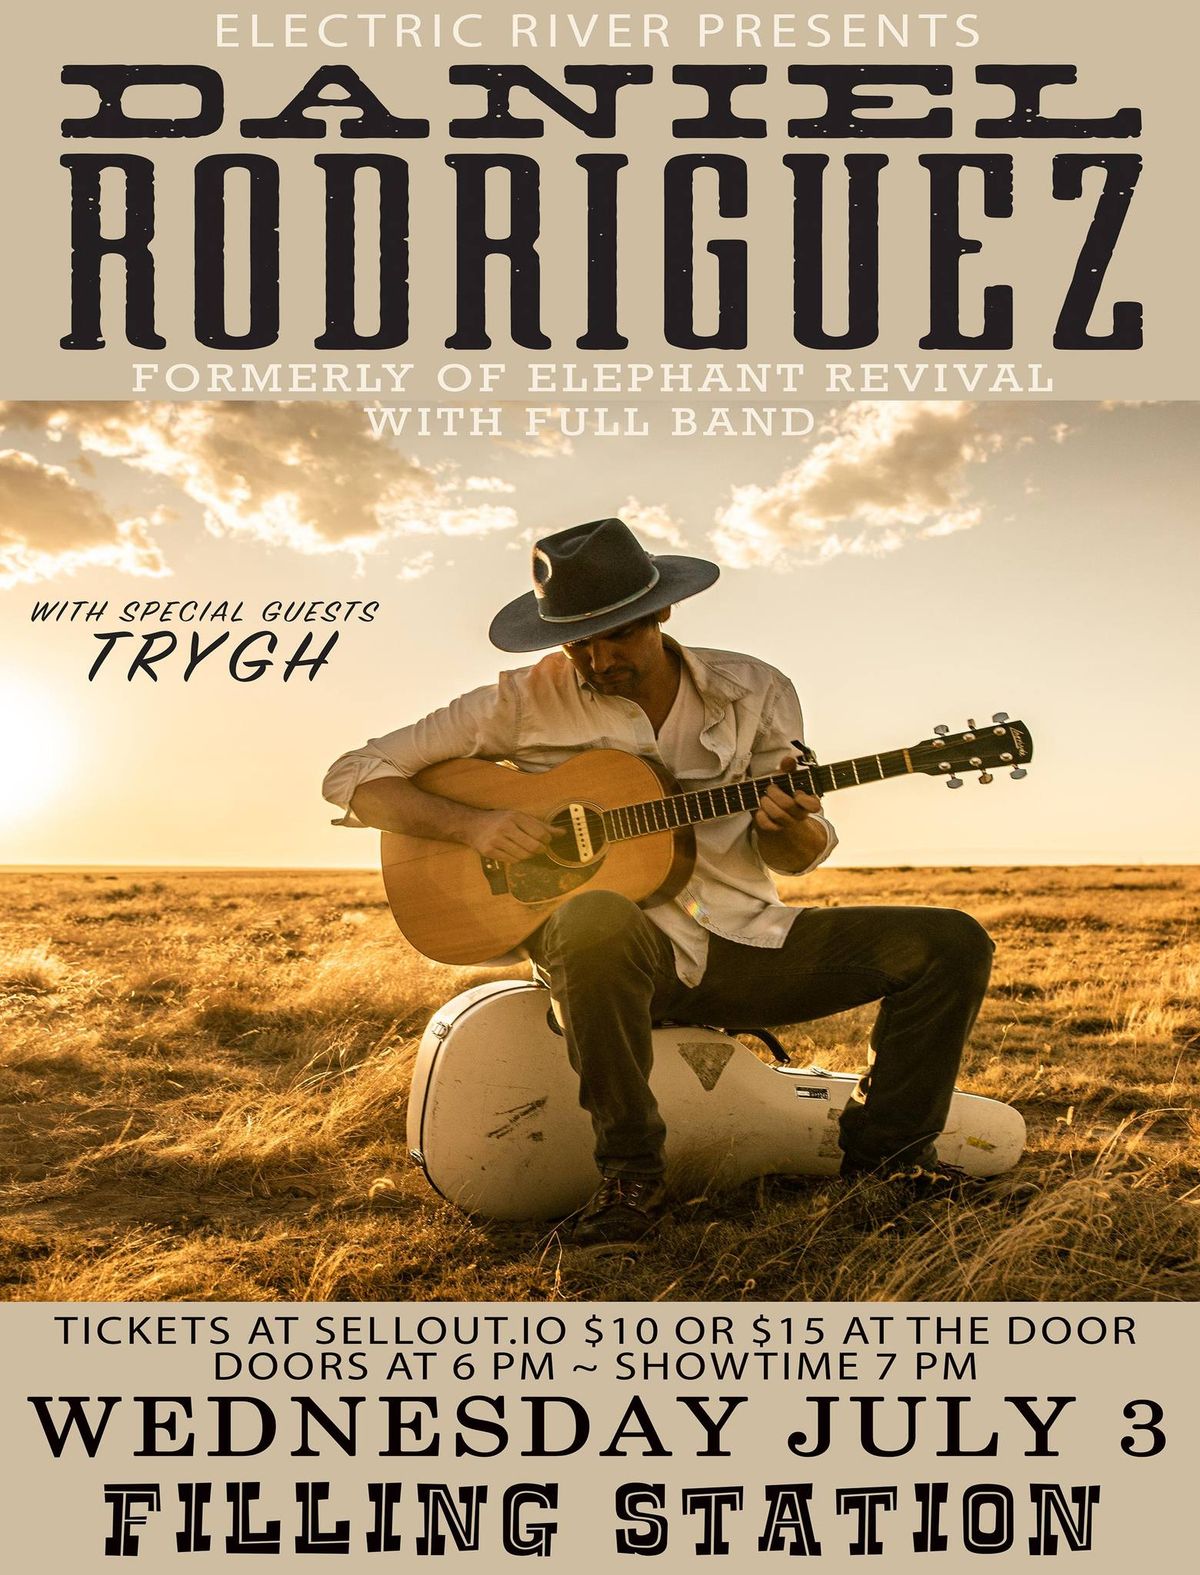 Daniel Rodriguez formerly of Elephant Revival with guests Trygh